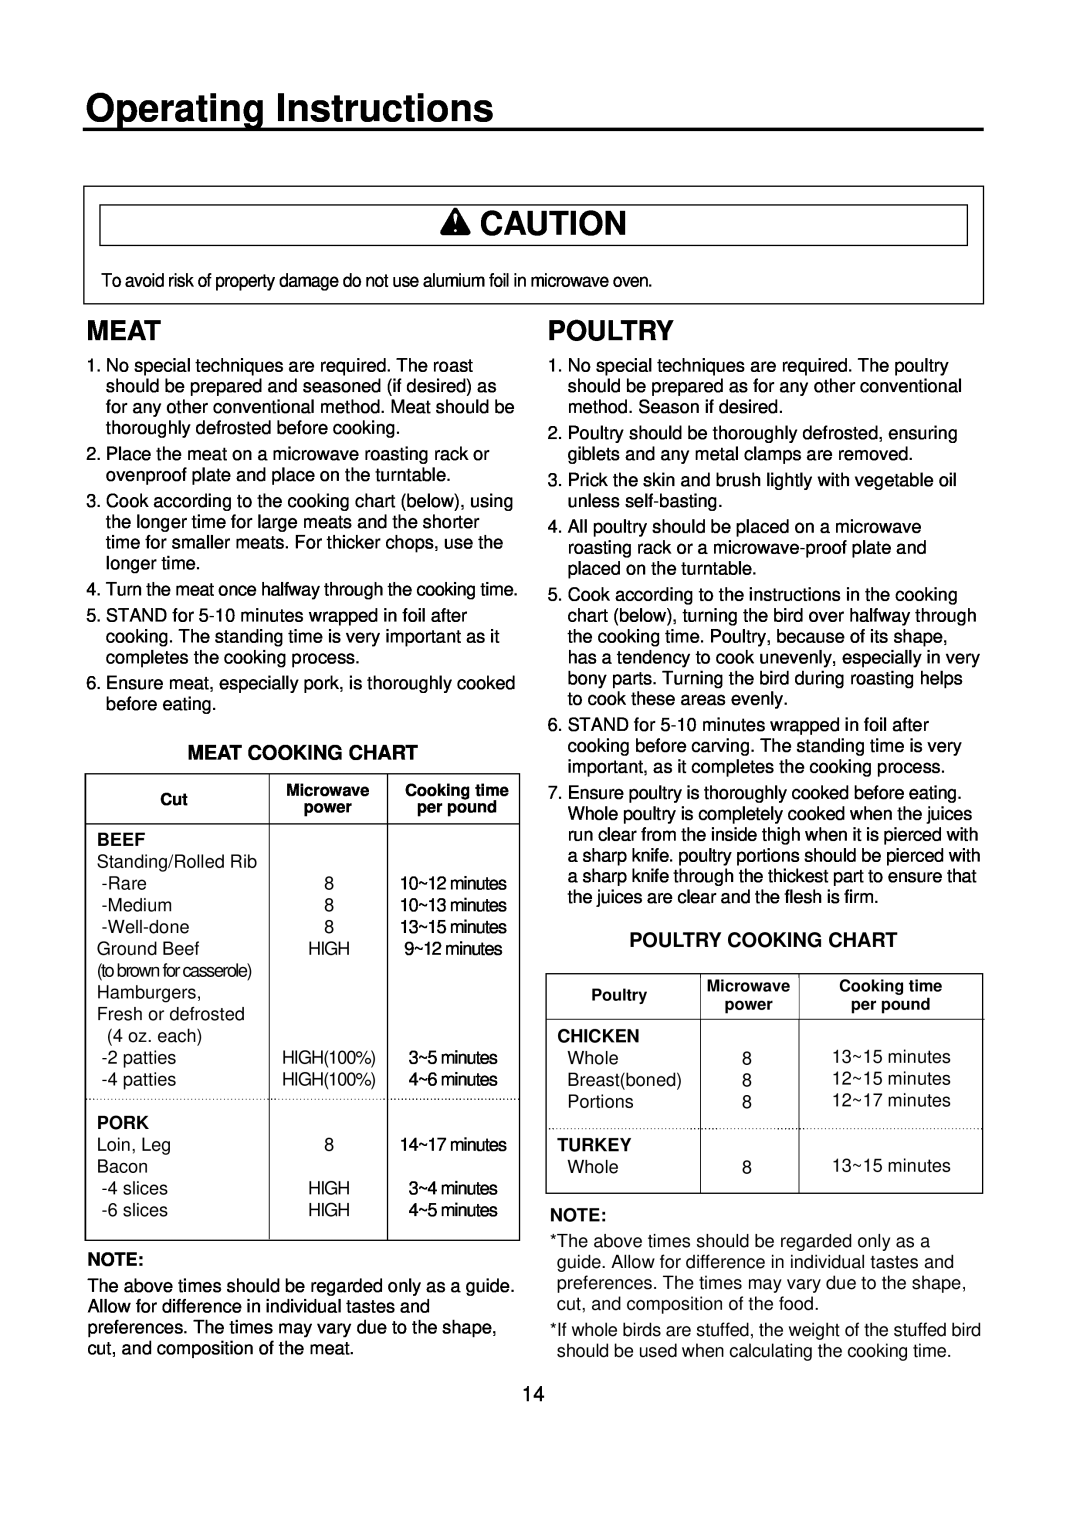 Amana ACM0720A warranty w CAUTION, Meat Cooking Chart, Poultry Cooking Chart, Operating Instructions 